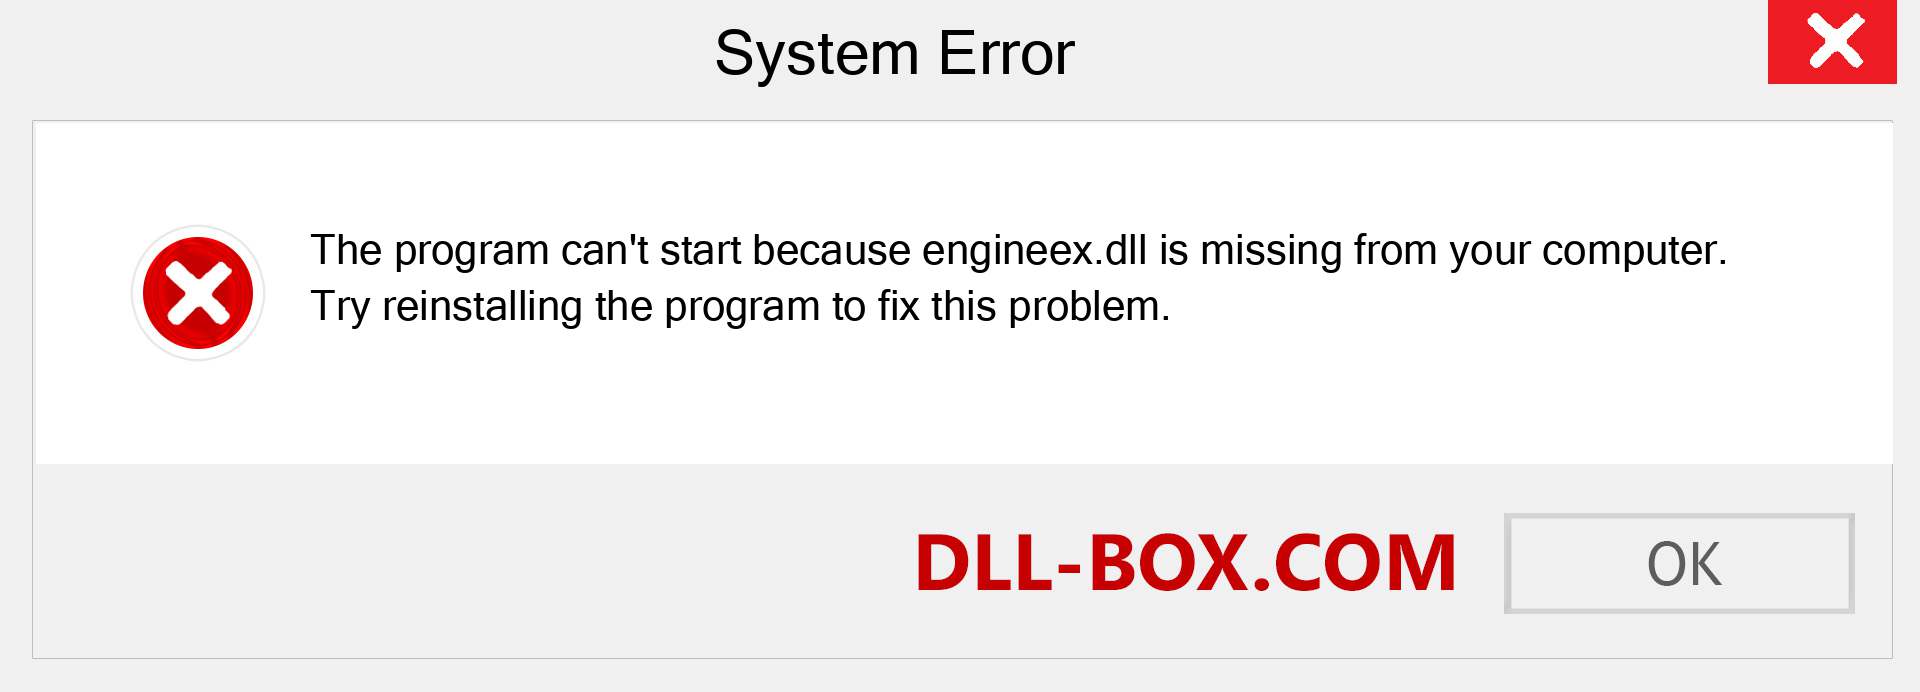  engineex.dll file is missing?. Download for Windows 7, 8, 10 - Fix  engineex dll Missing Error on Windows, photos, images